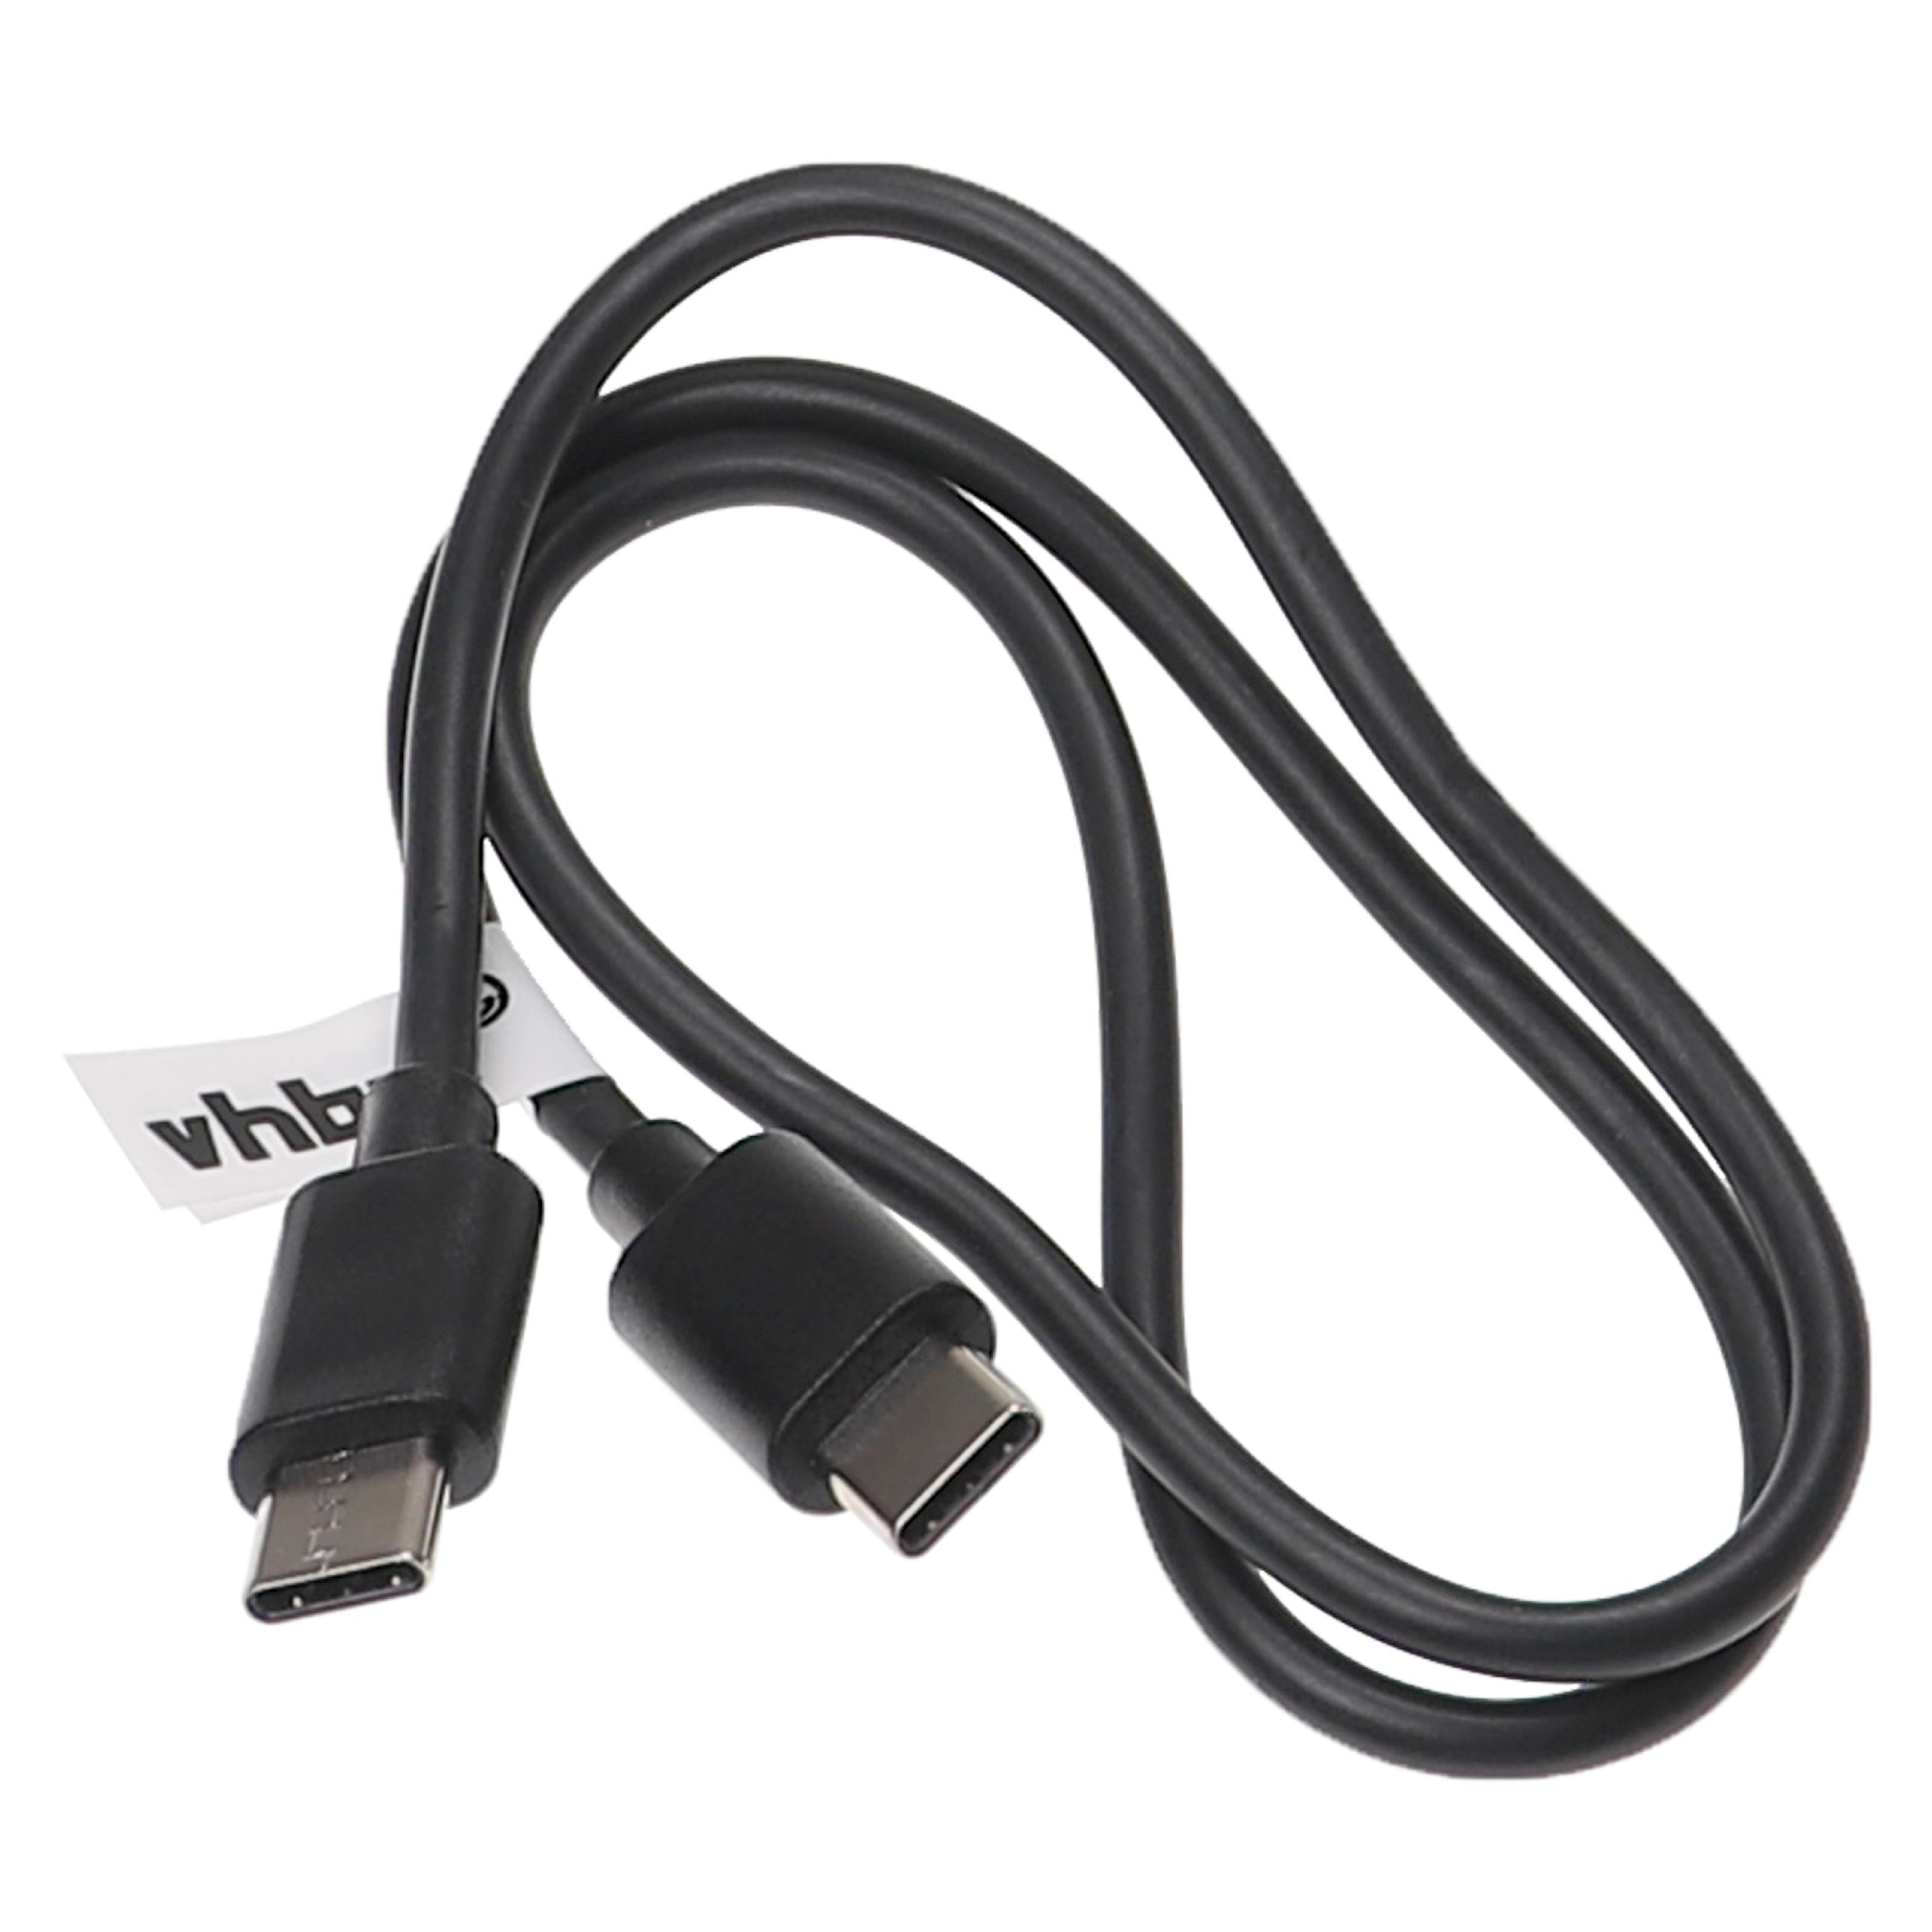 USB C Charging Cable suitable for various Laptops, Tablets, Smartphones - USB C Cable 50 cm, Black